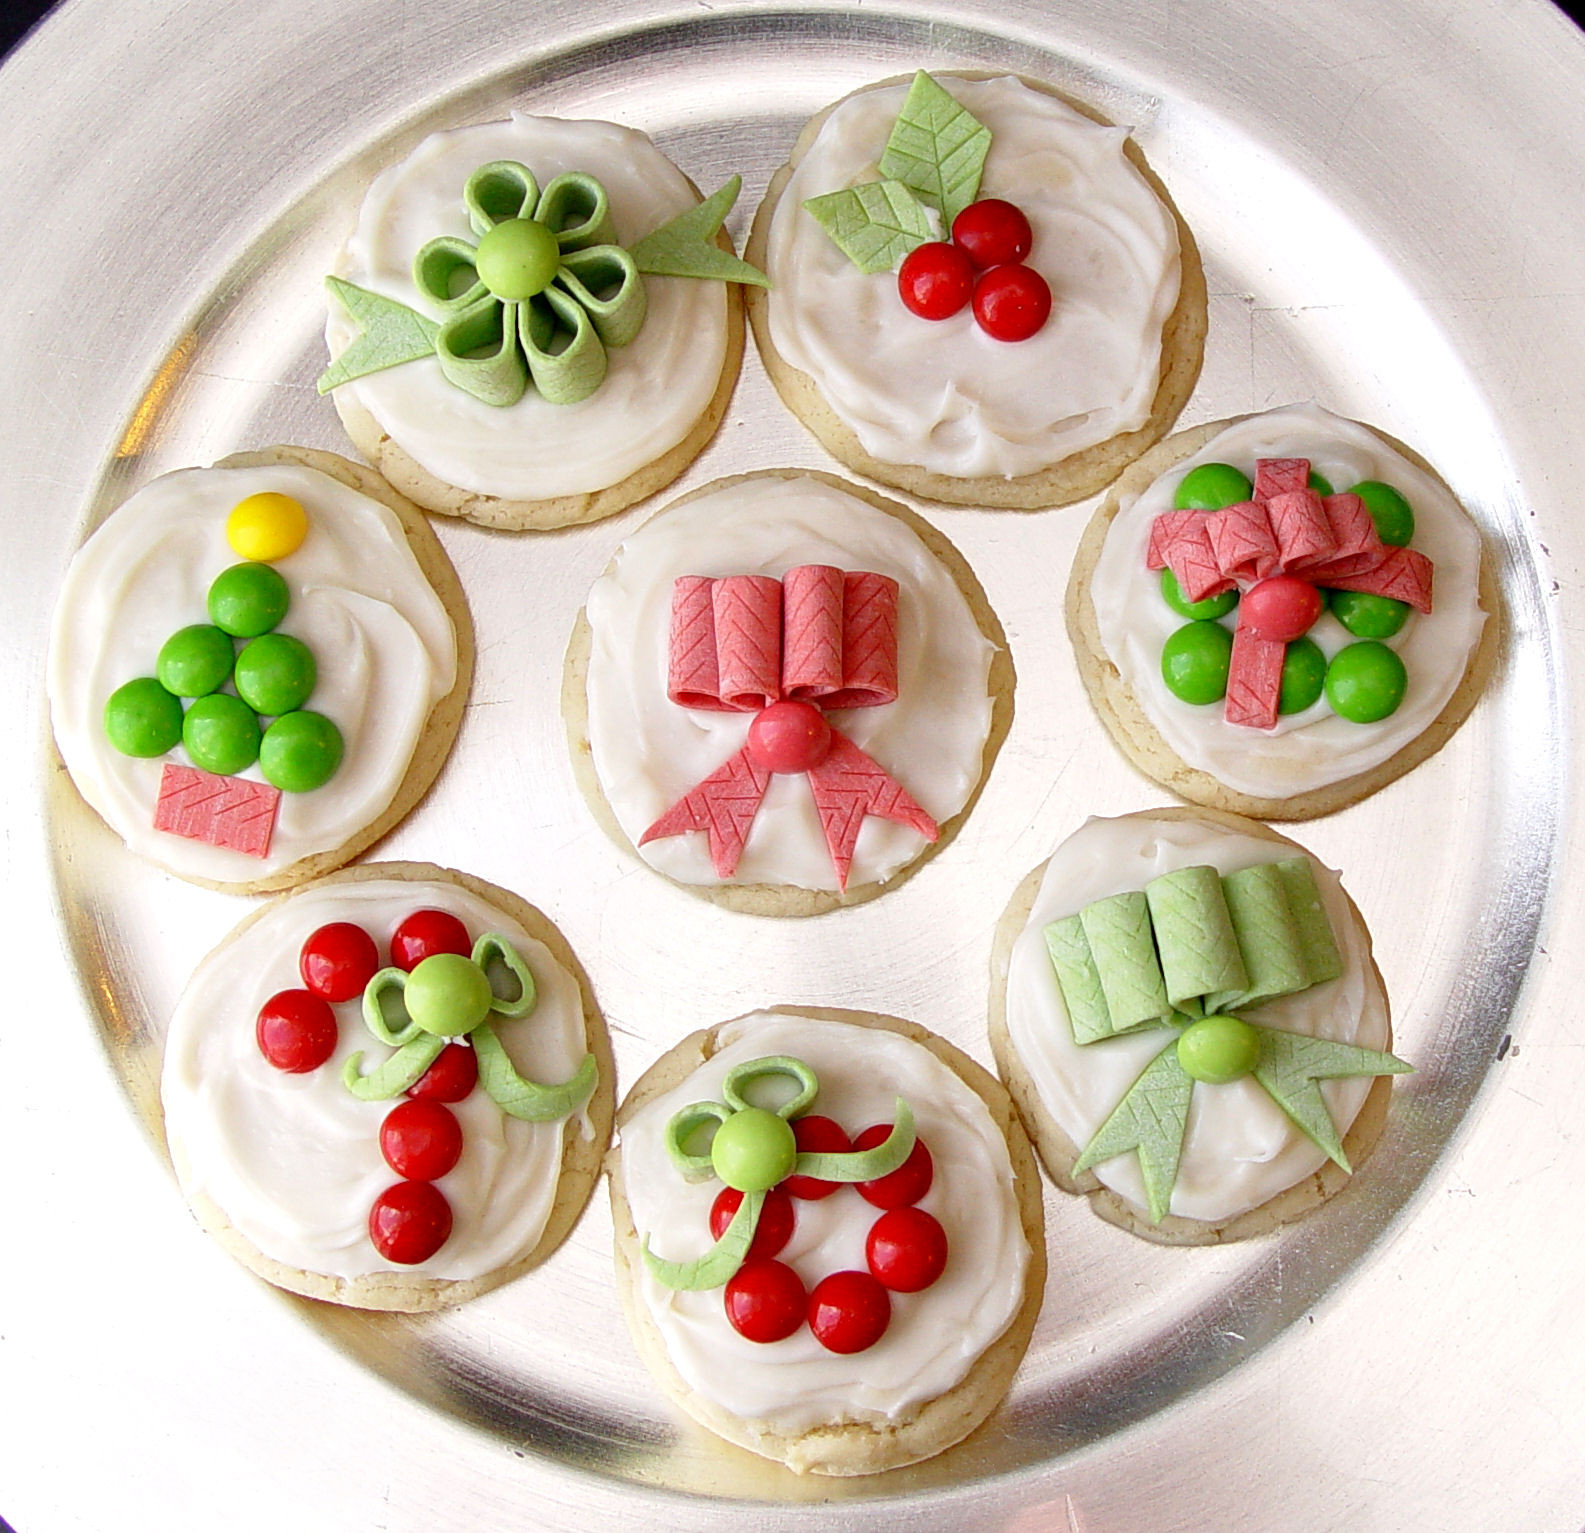 Decorated Christmas Sugar Cookies
 Candy Decorated Christmas Sugar Cookies